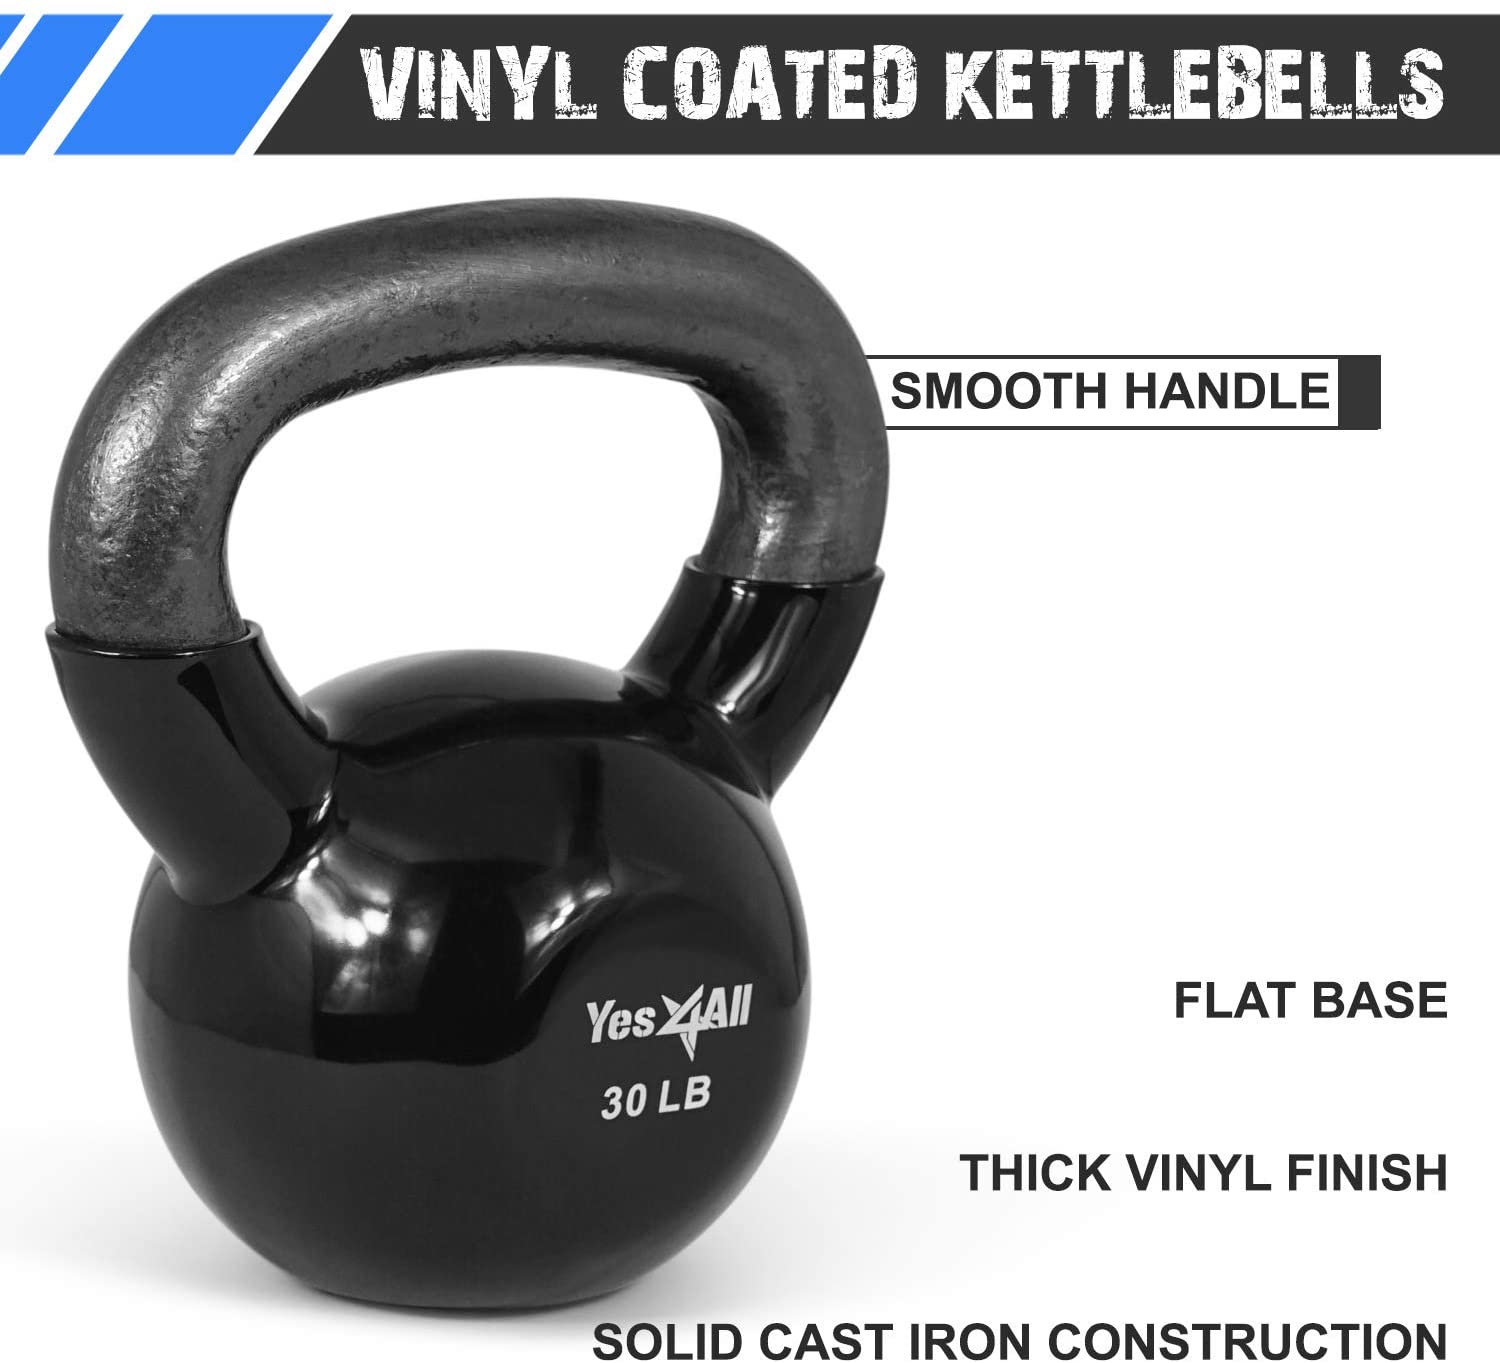 Yes4All 35 lb Vinyl Coated / PVC Kettlebell, Black, Combo / Set, Includes 15-20lb - image 5 of 8